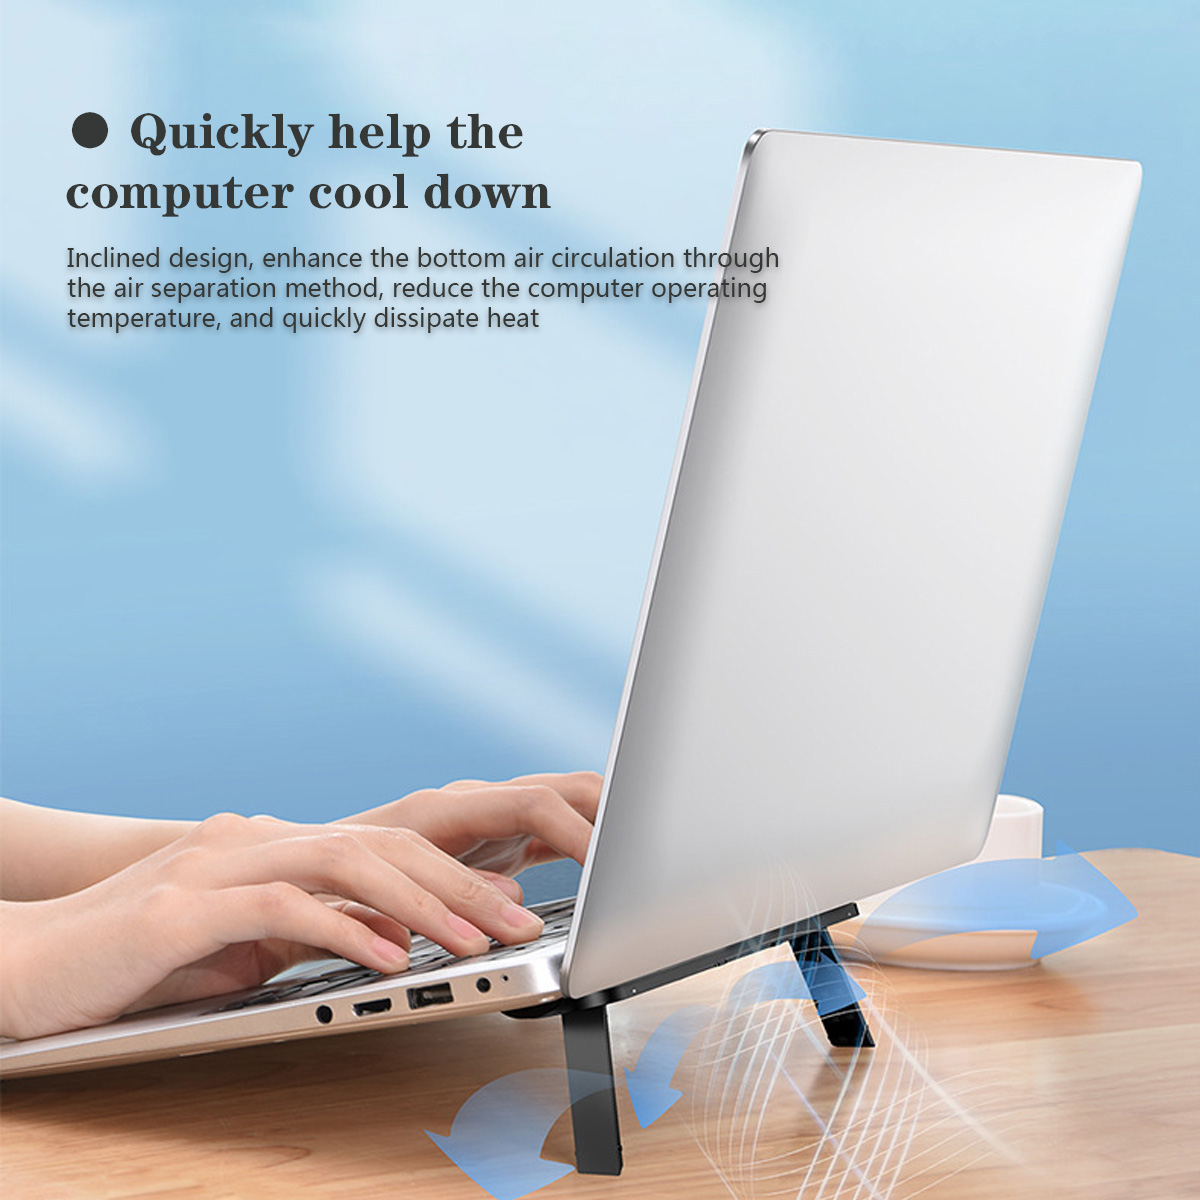 Portable-Folding-Double-Angle-Adjustable-Heat-Dissipation-Cooling-Down-Sticky-Macbook-Holder-Stand-f-1832936-5